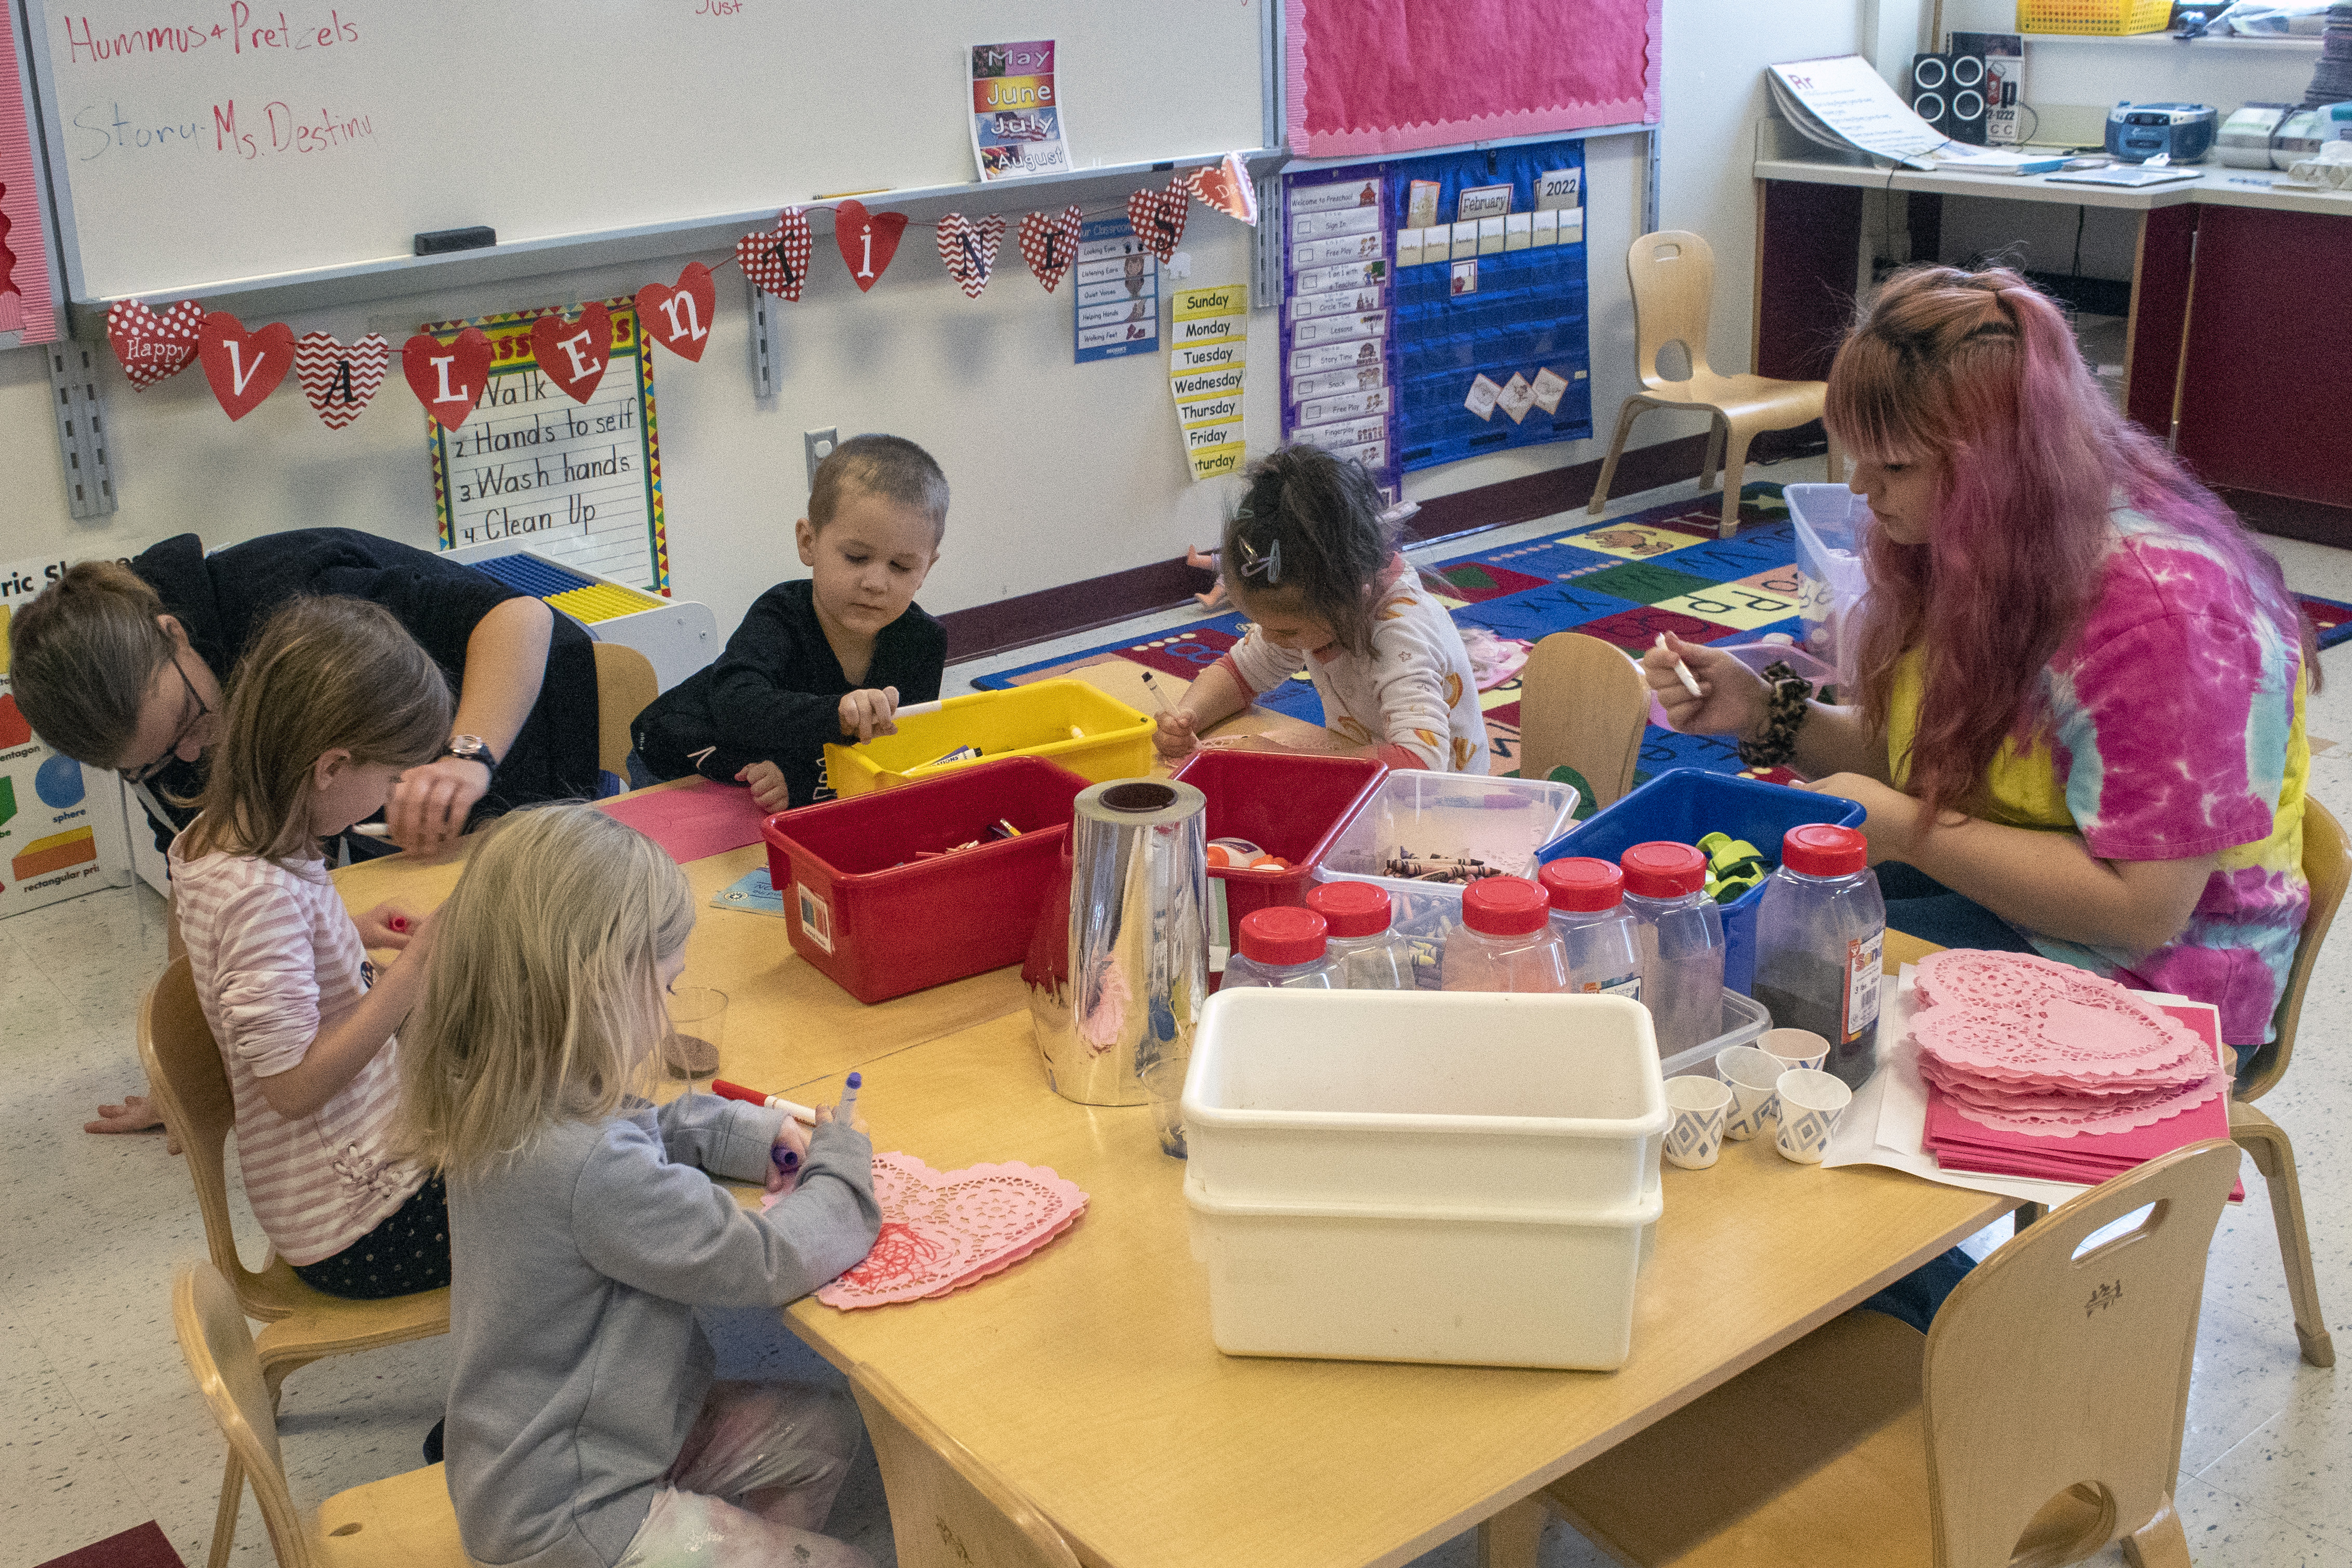 Preschoolers work on art projects guided by student teachers.